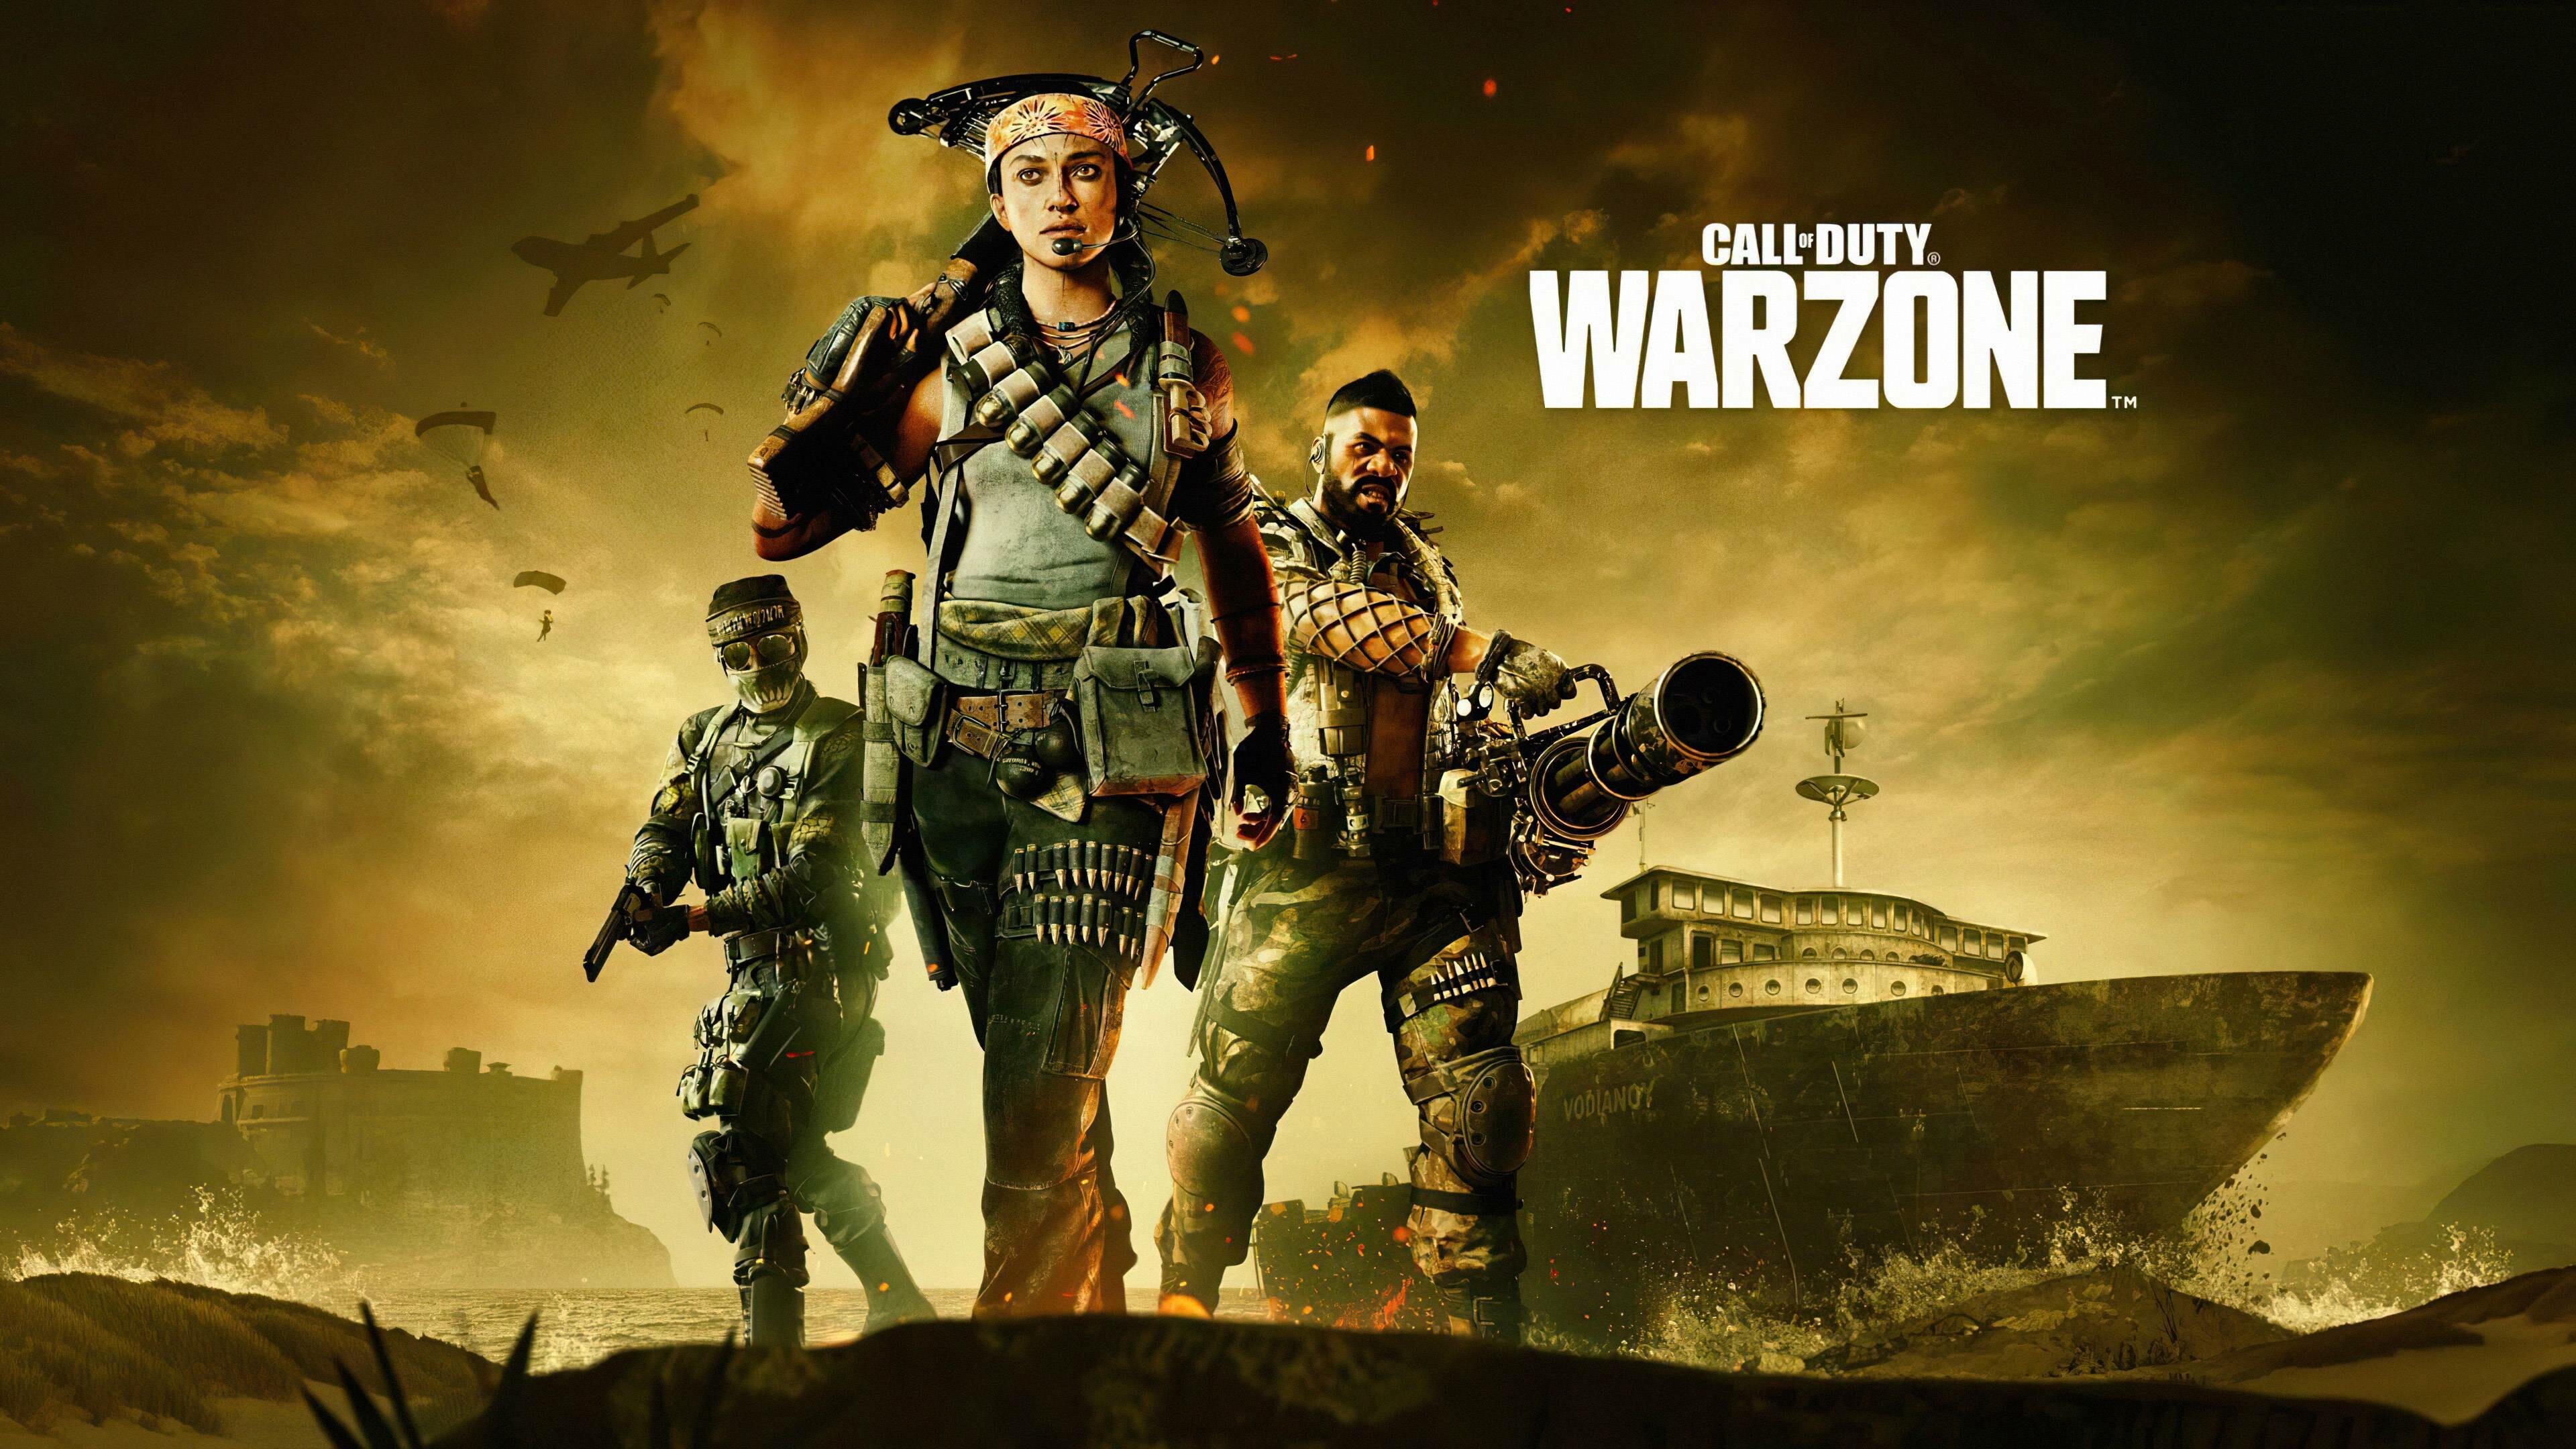 Call of Duty: Warzone, Released on March 10, 2020, as part of Modern Warfare. 3840x2160 4K Background.